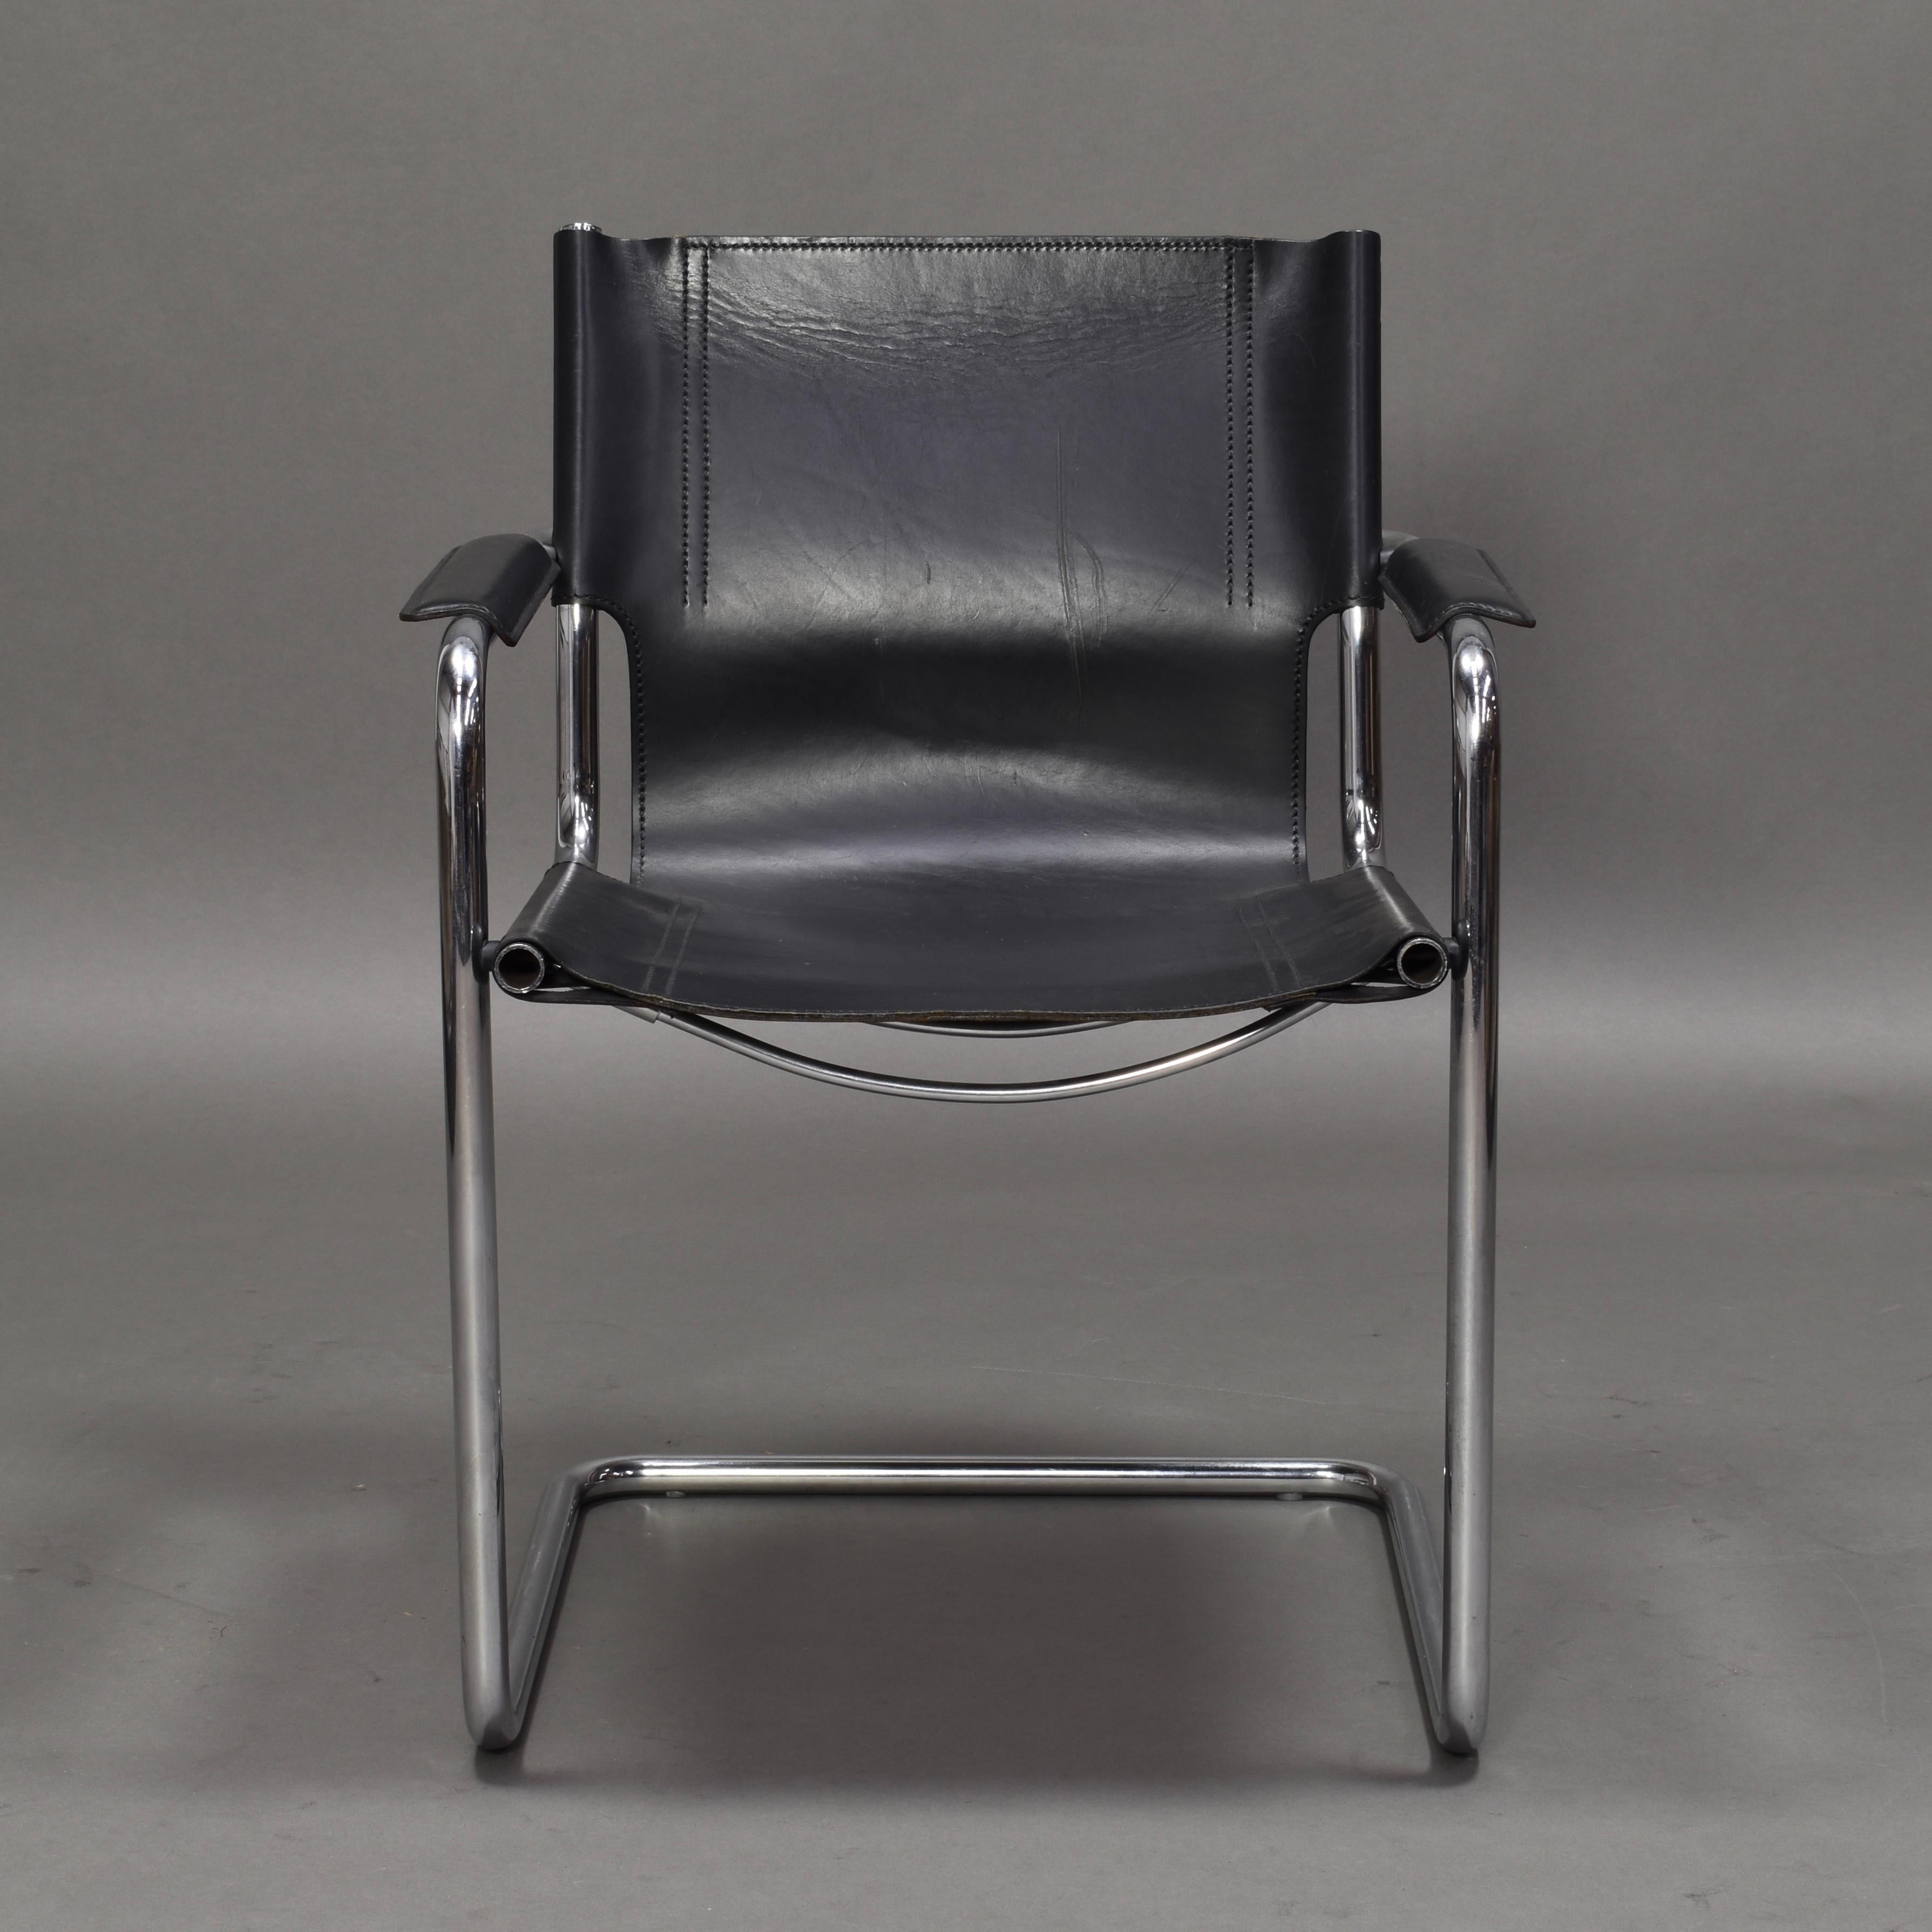 Bauhaus chair designed by Mart Stam for Matteo Grassi in the 1970s. In the style of Marcel Breuer. The chair features leather seating and a chrome tubular base. 

Designer: Mart Stam

Manufacturer: Matteo Grassi

Country: Italy

Model: MG5